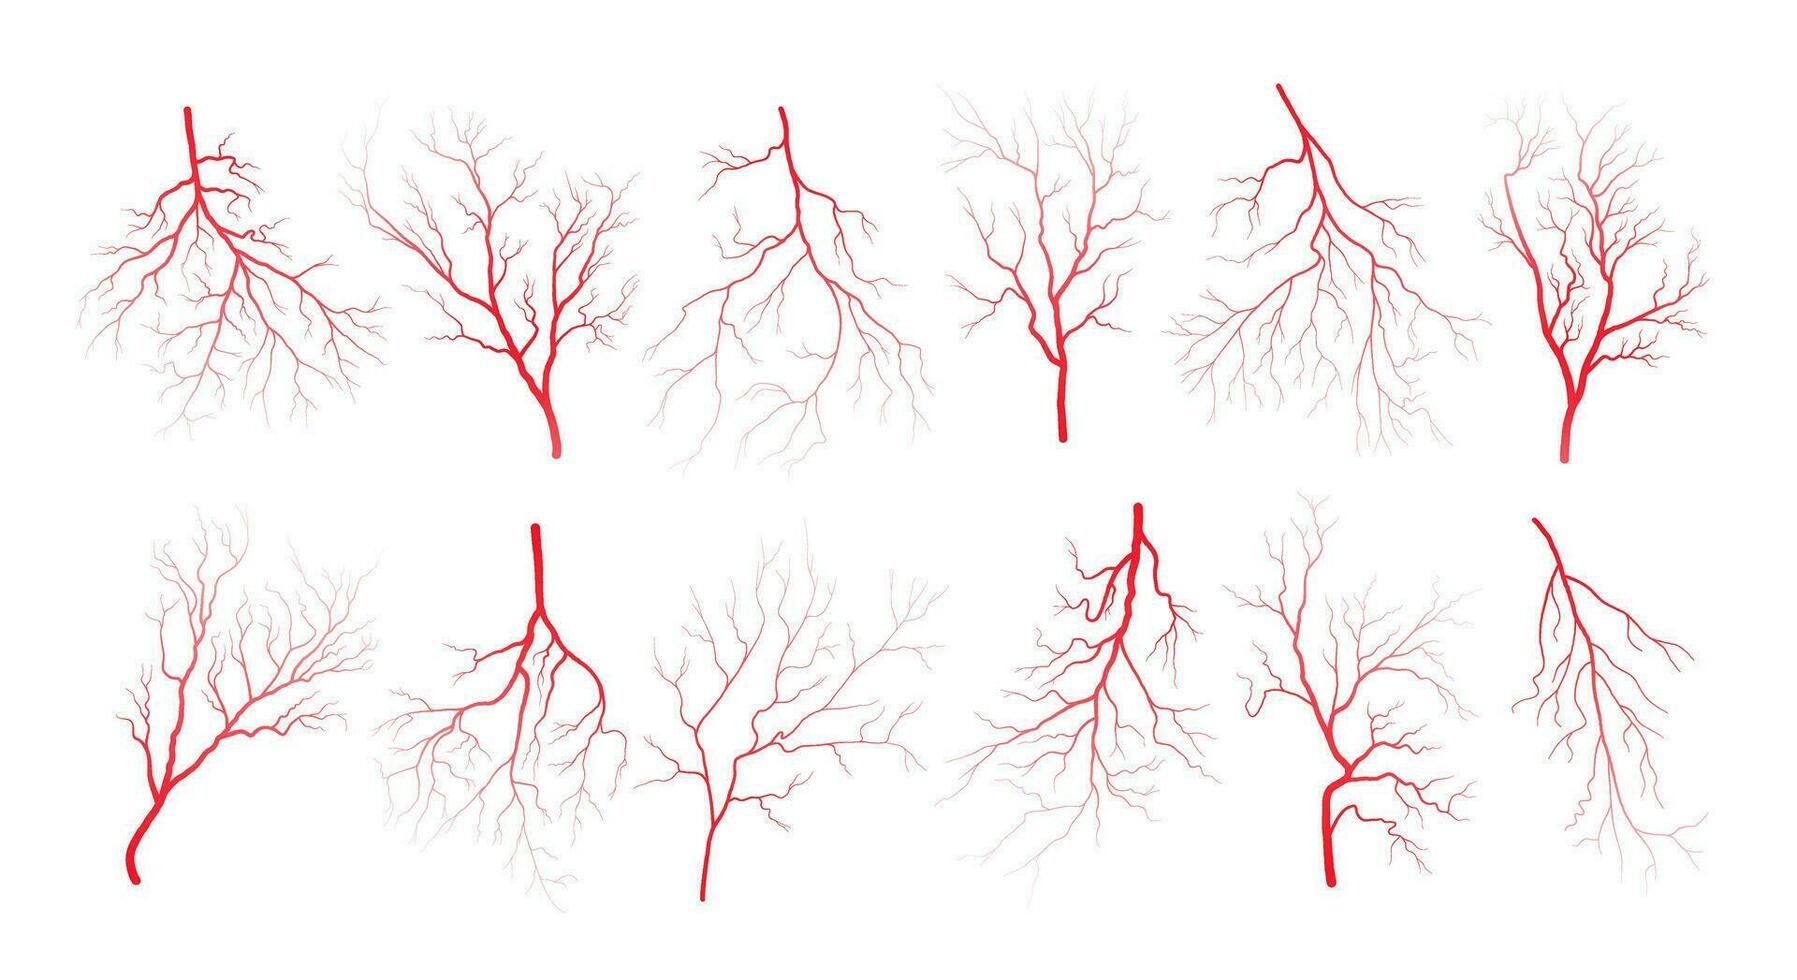 Human eye blood veins vessels silhouettes vector illustration set isolated on white background.